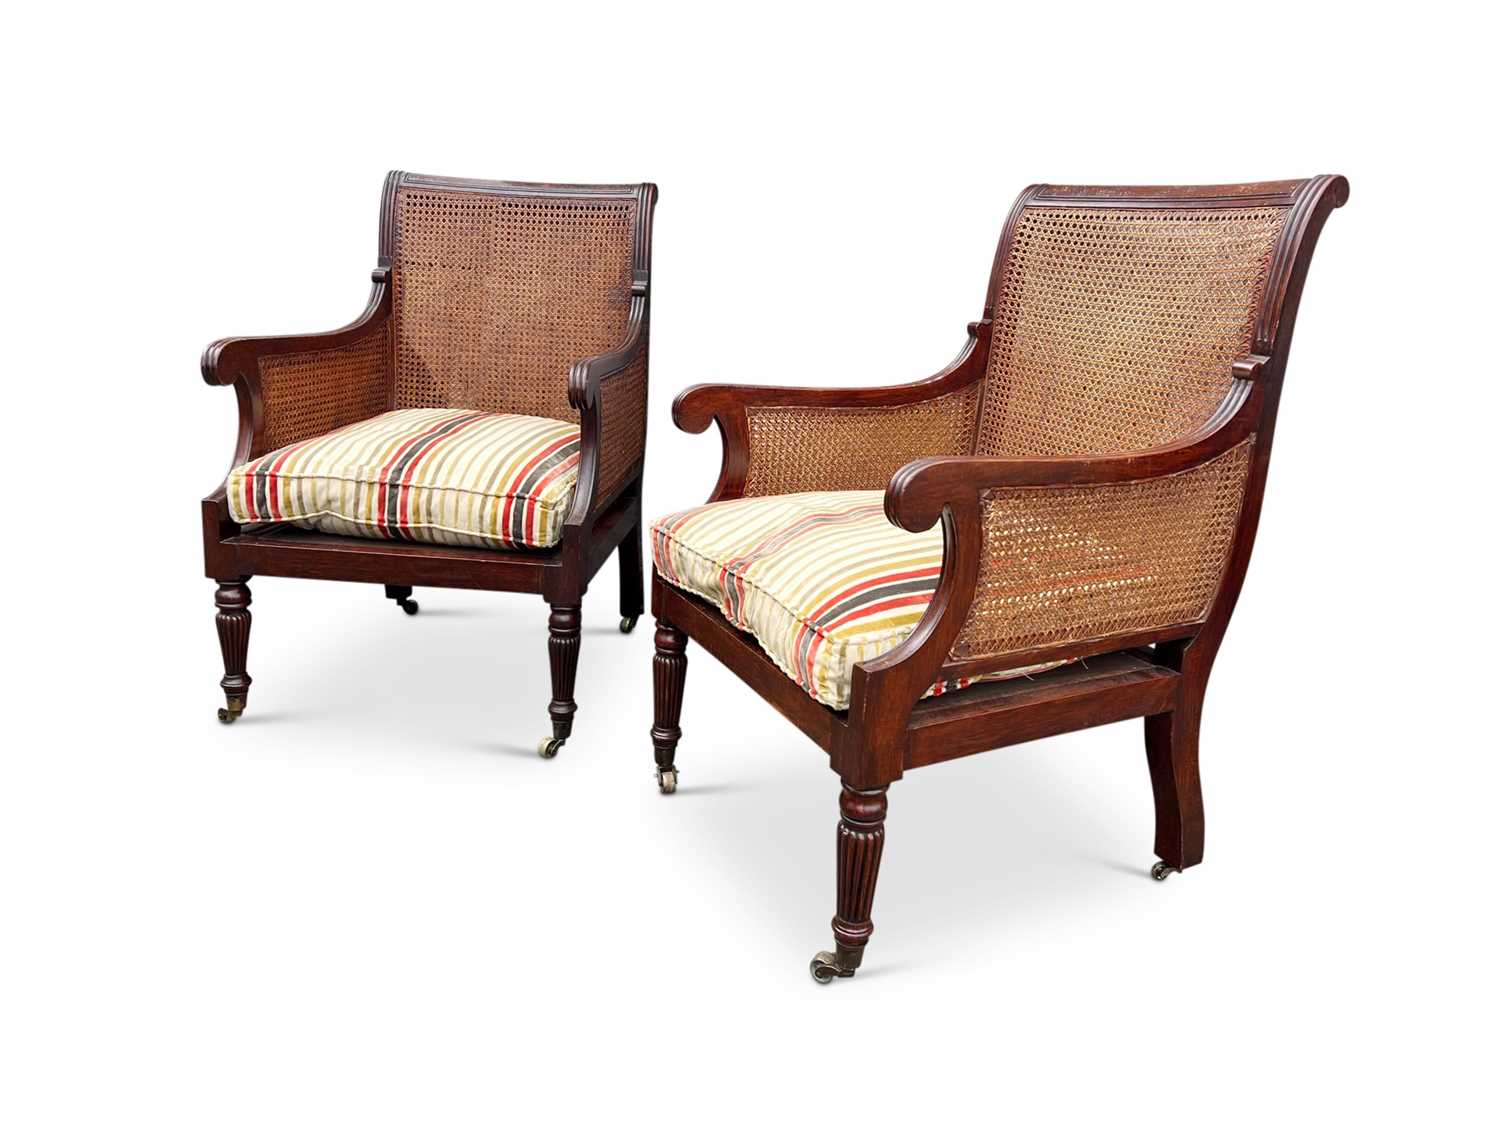 A PAIR OF EARLY 20TH CENTURY CANED BERGERE OR LIBRARY CHAIRS